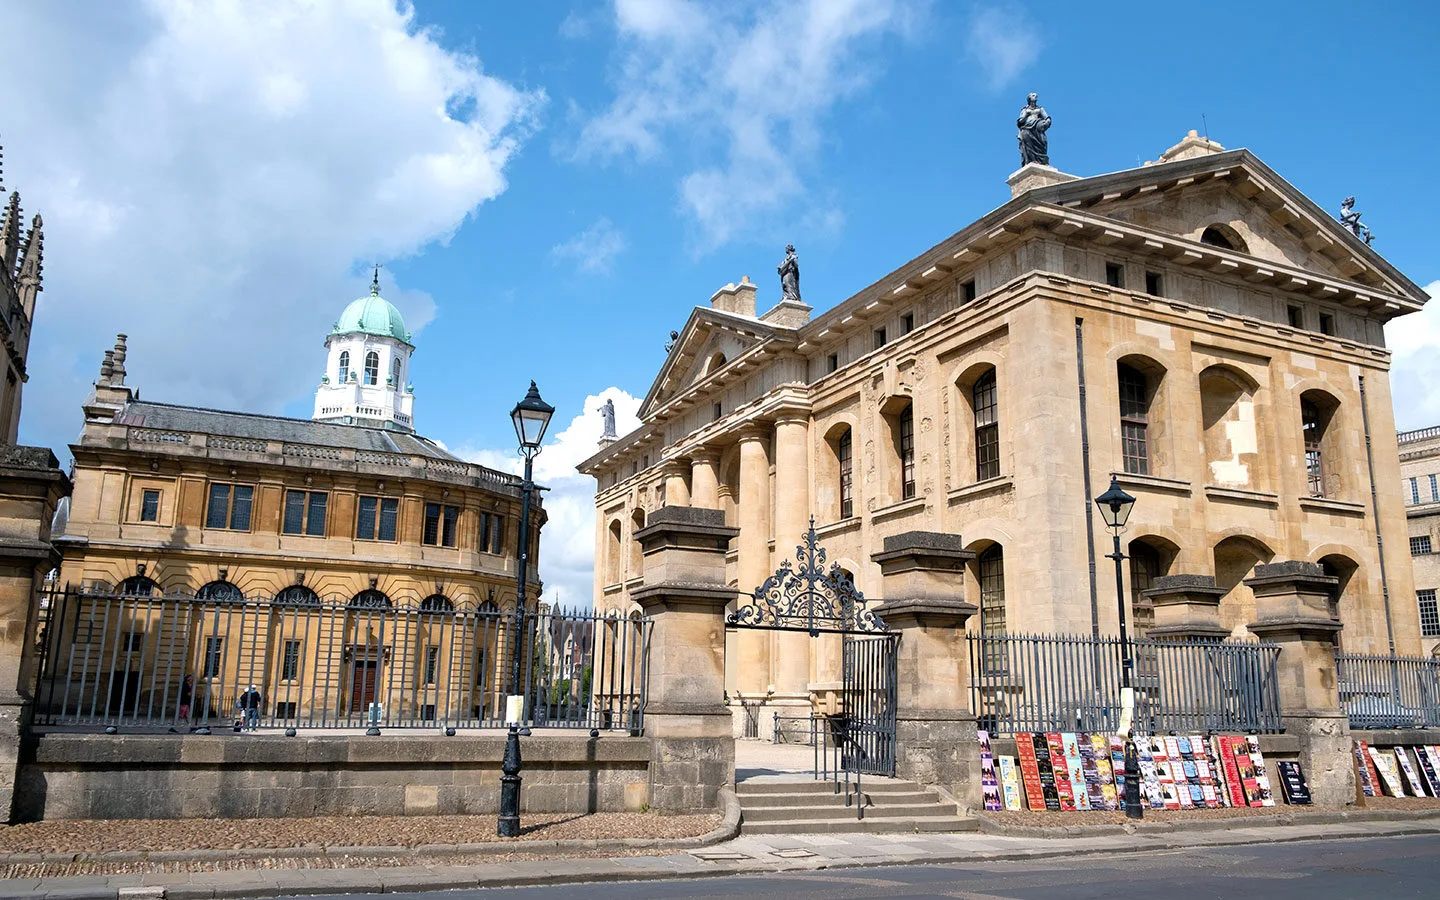 The Sheldonian Theatre and Clarendon Building, University of Oxford